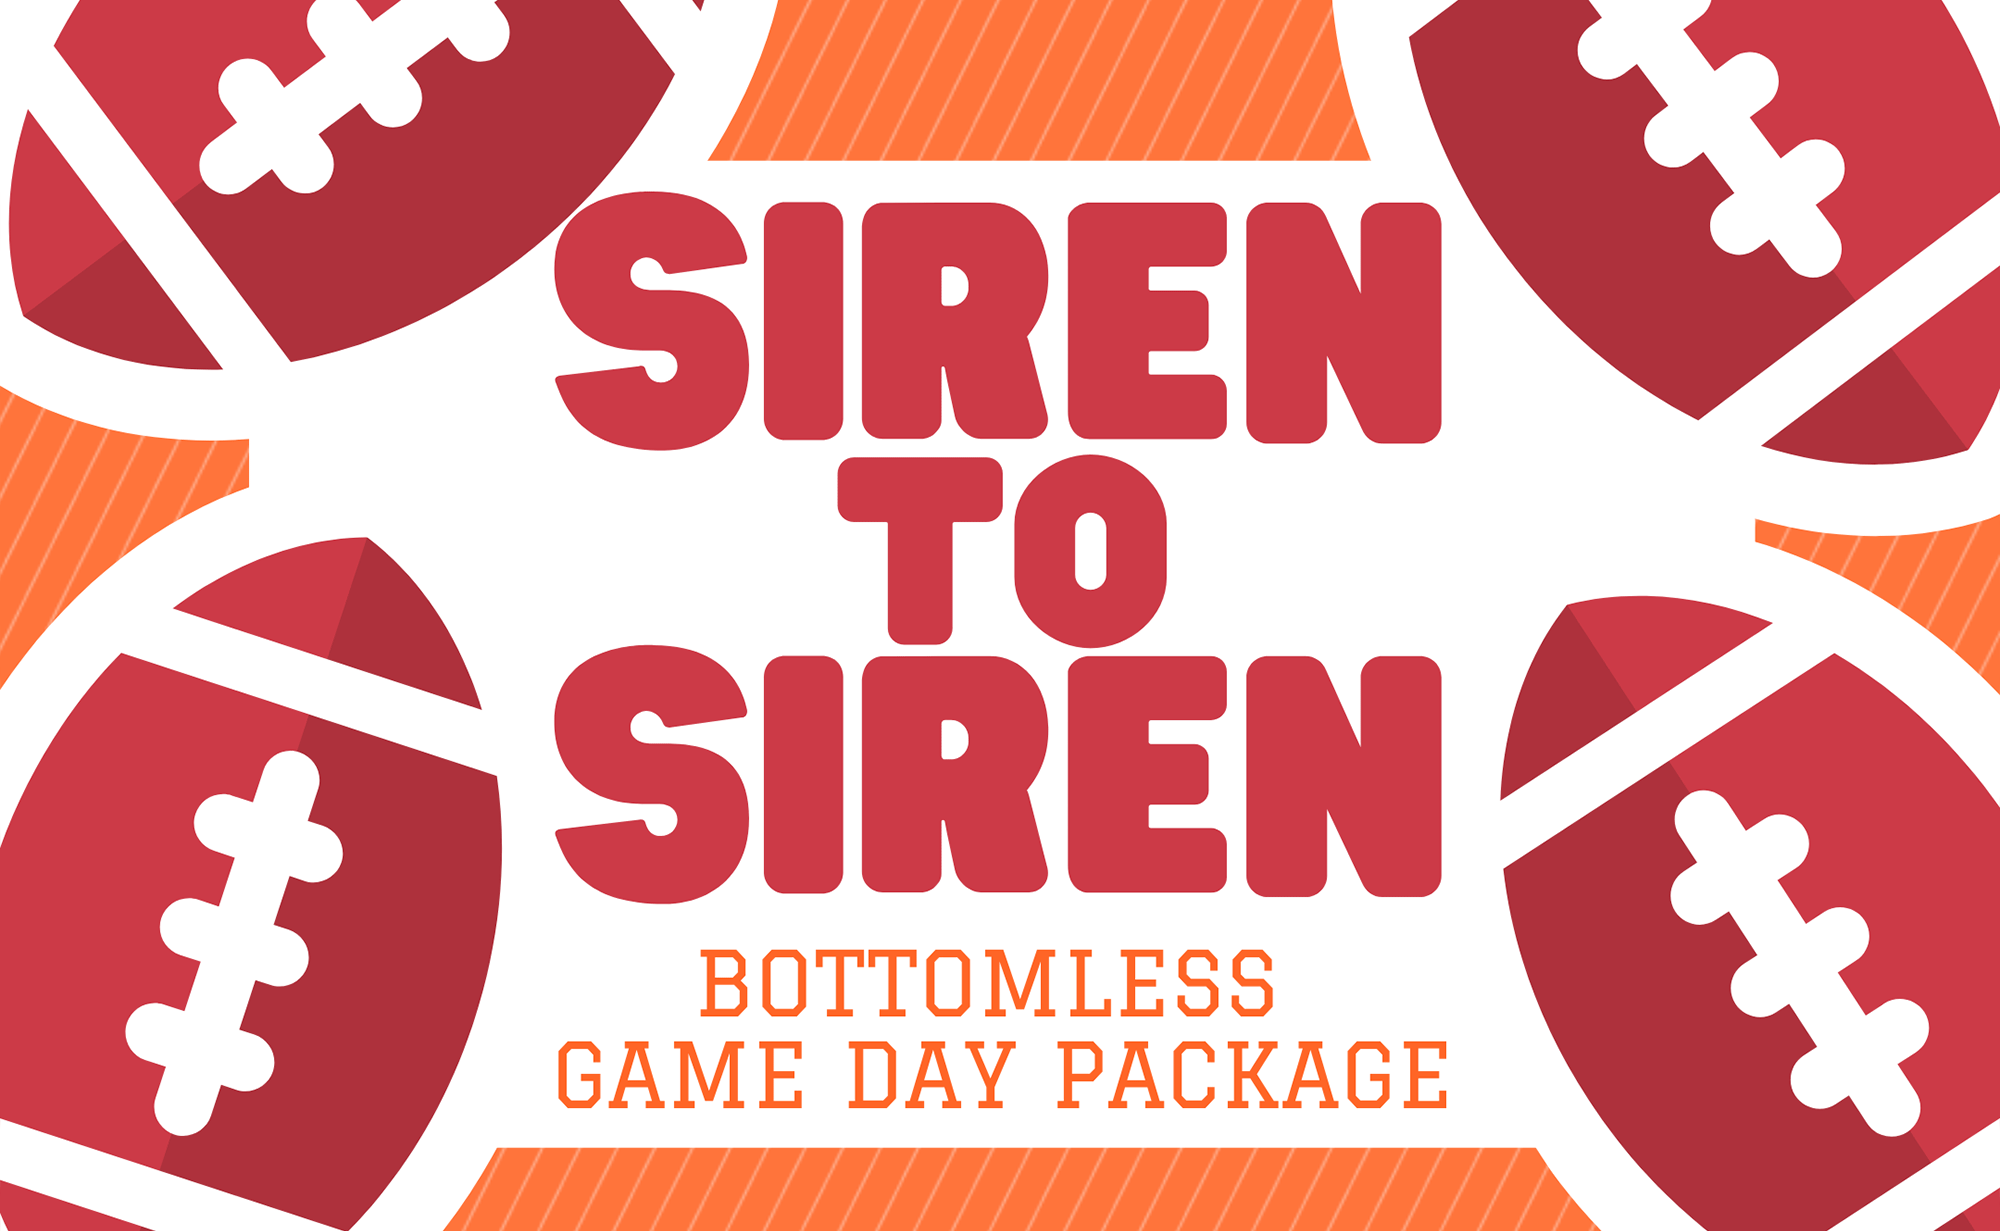 The Stirling Arms Game Day Package